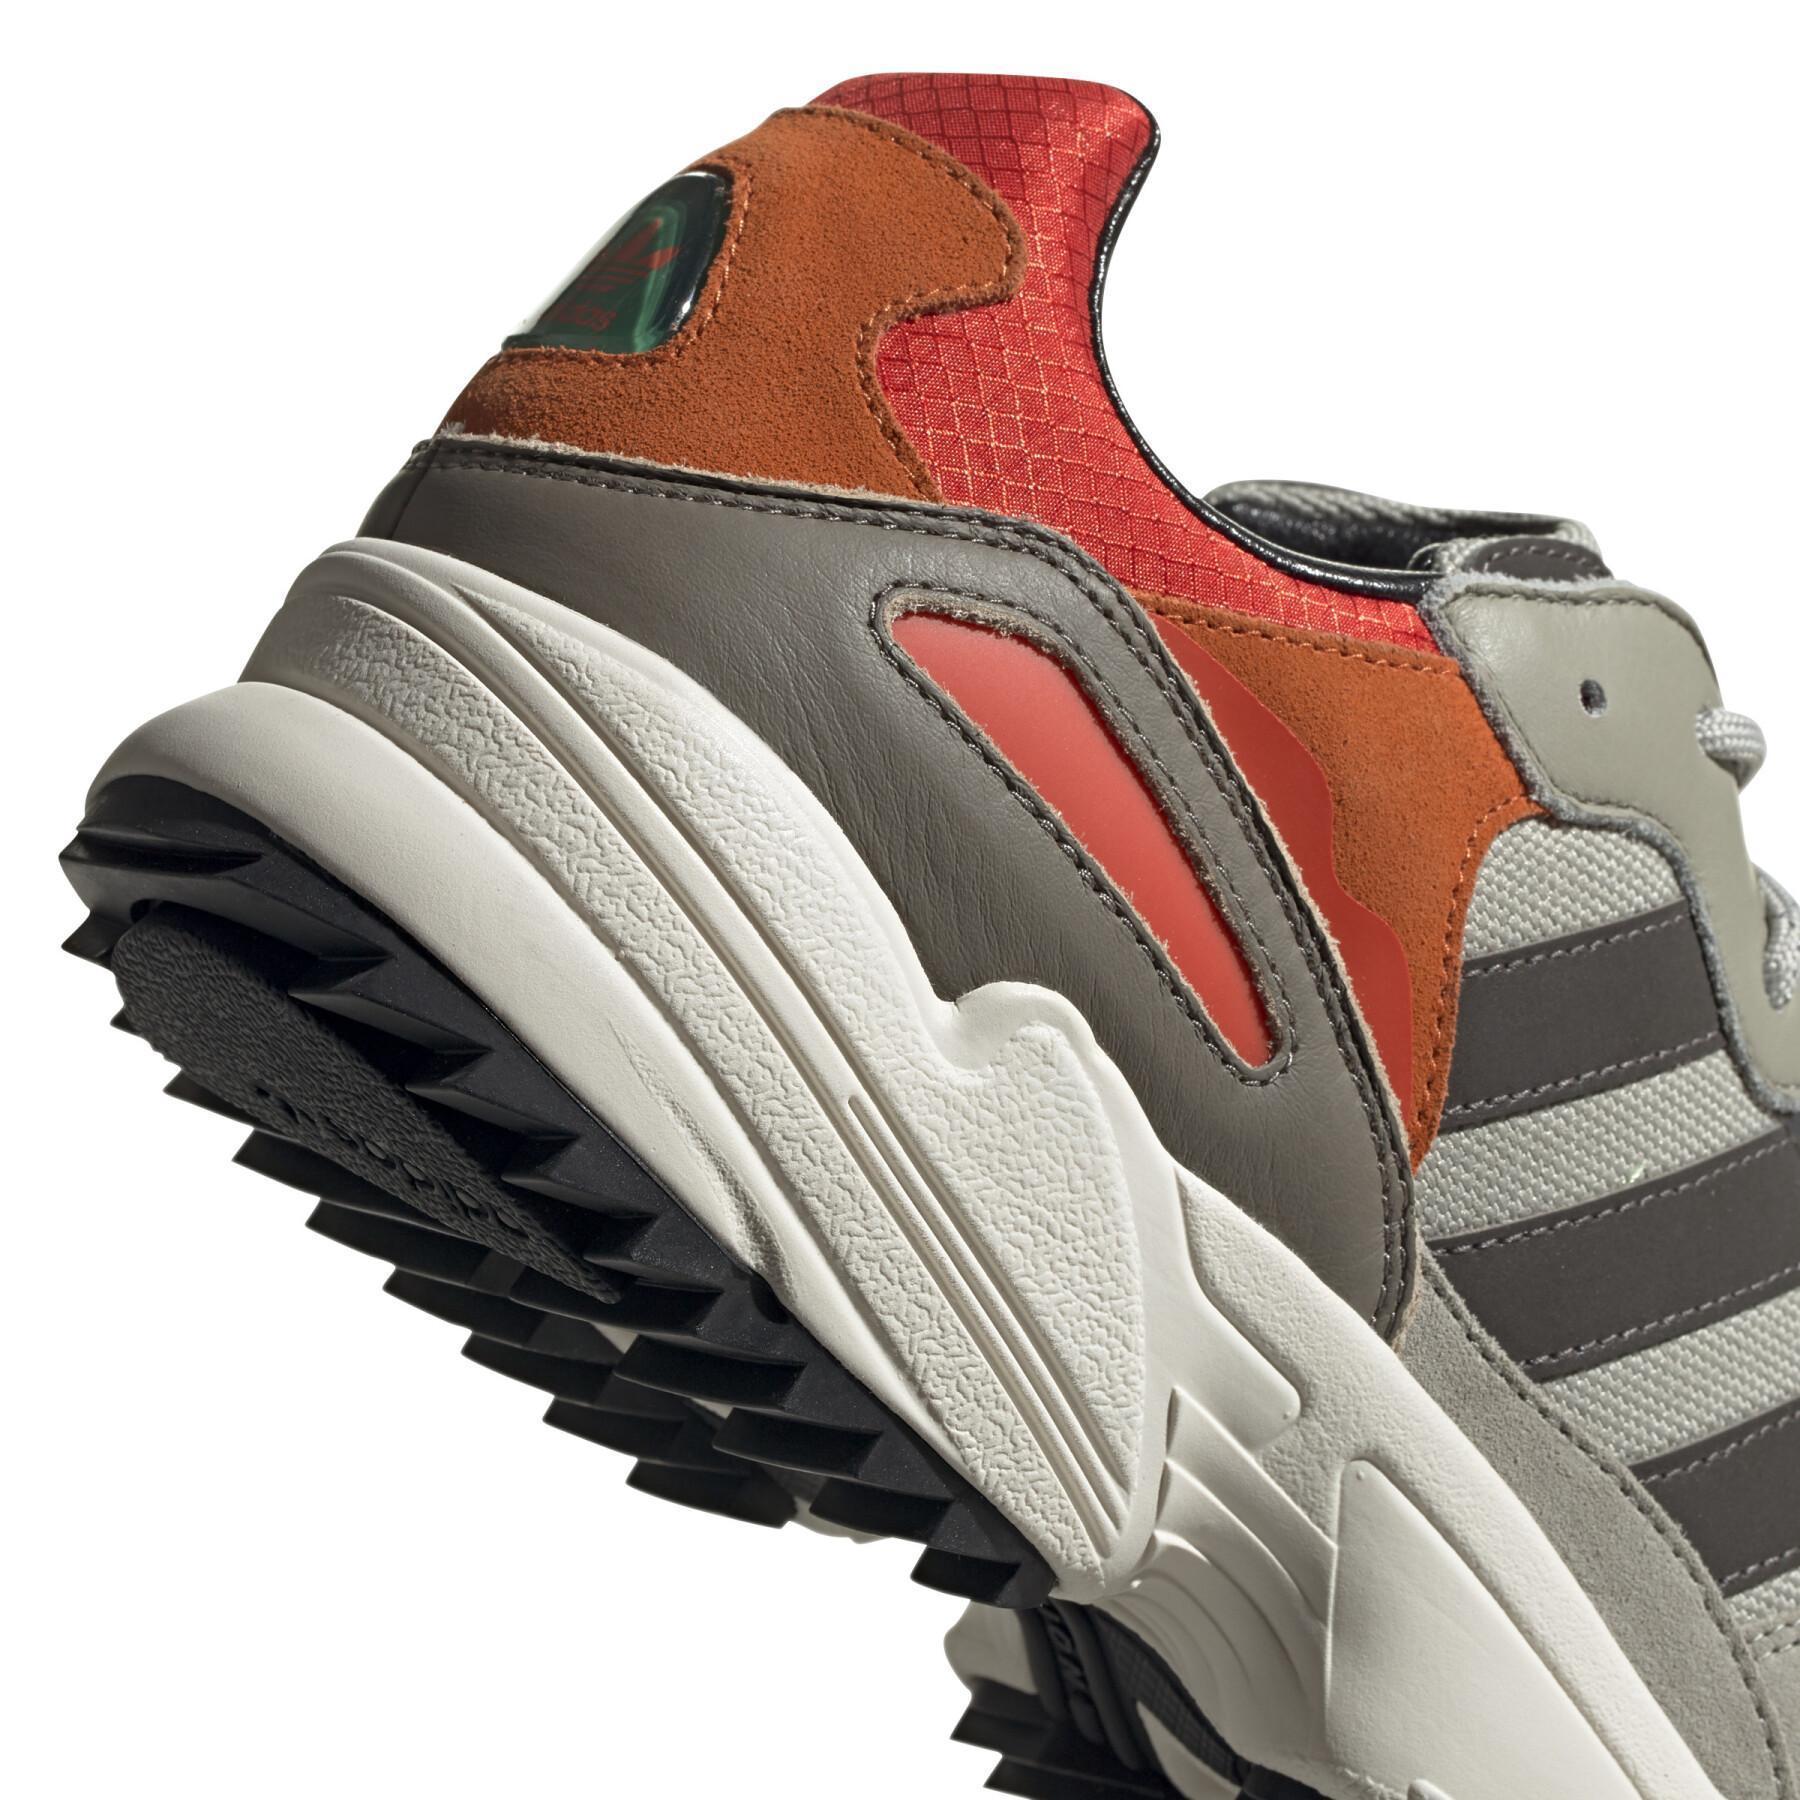 adidas Yung-96 Trail Sneakers